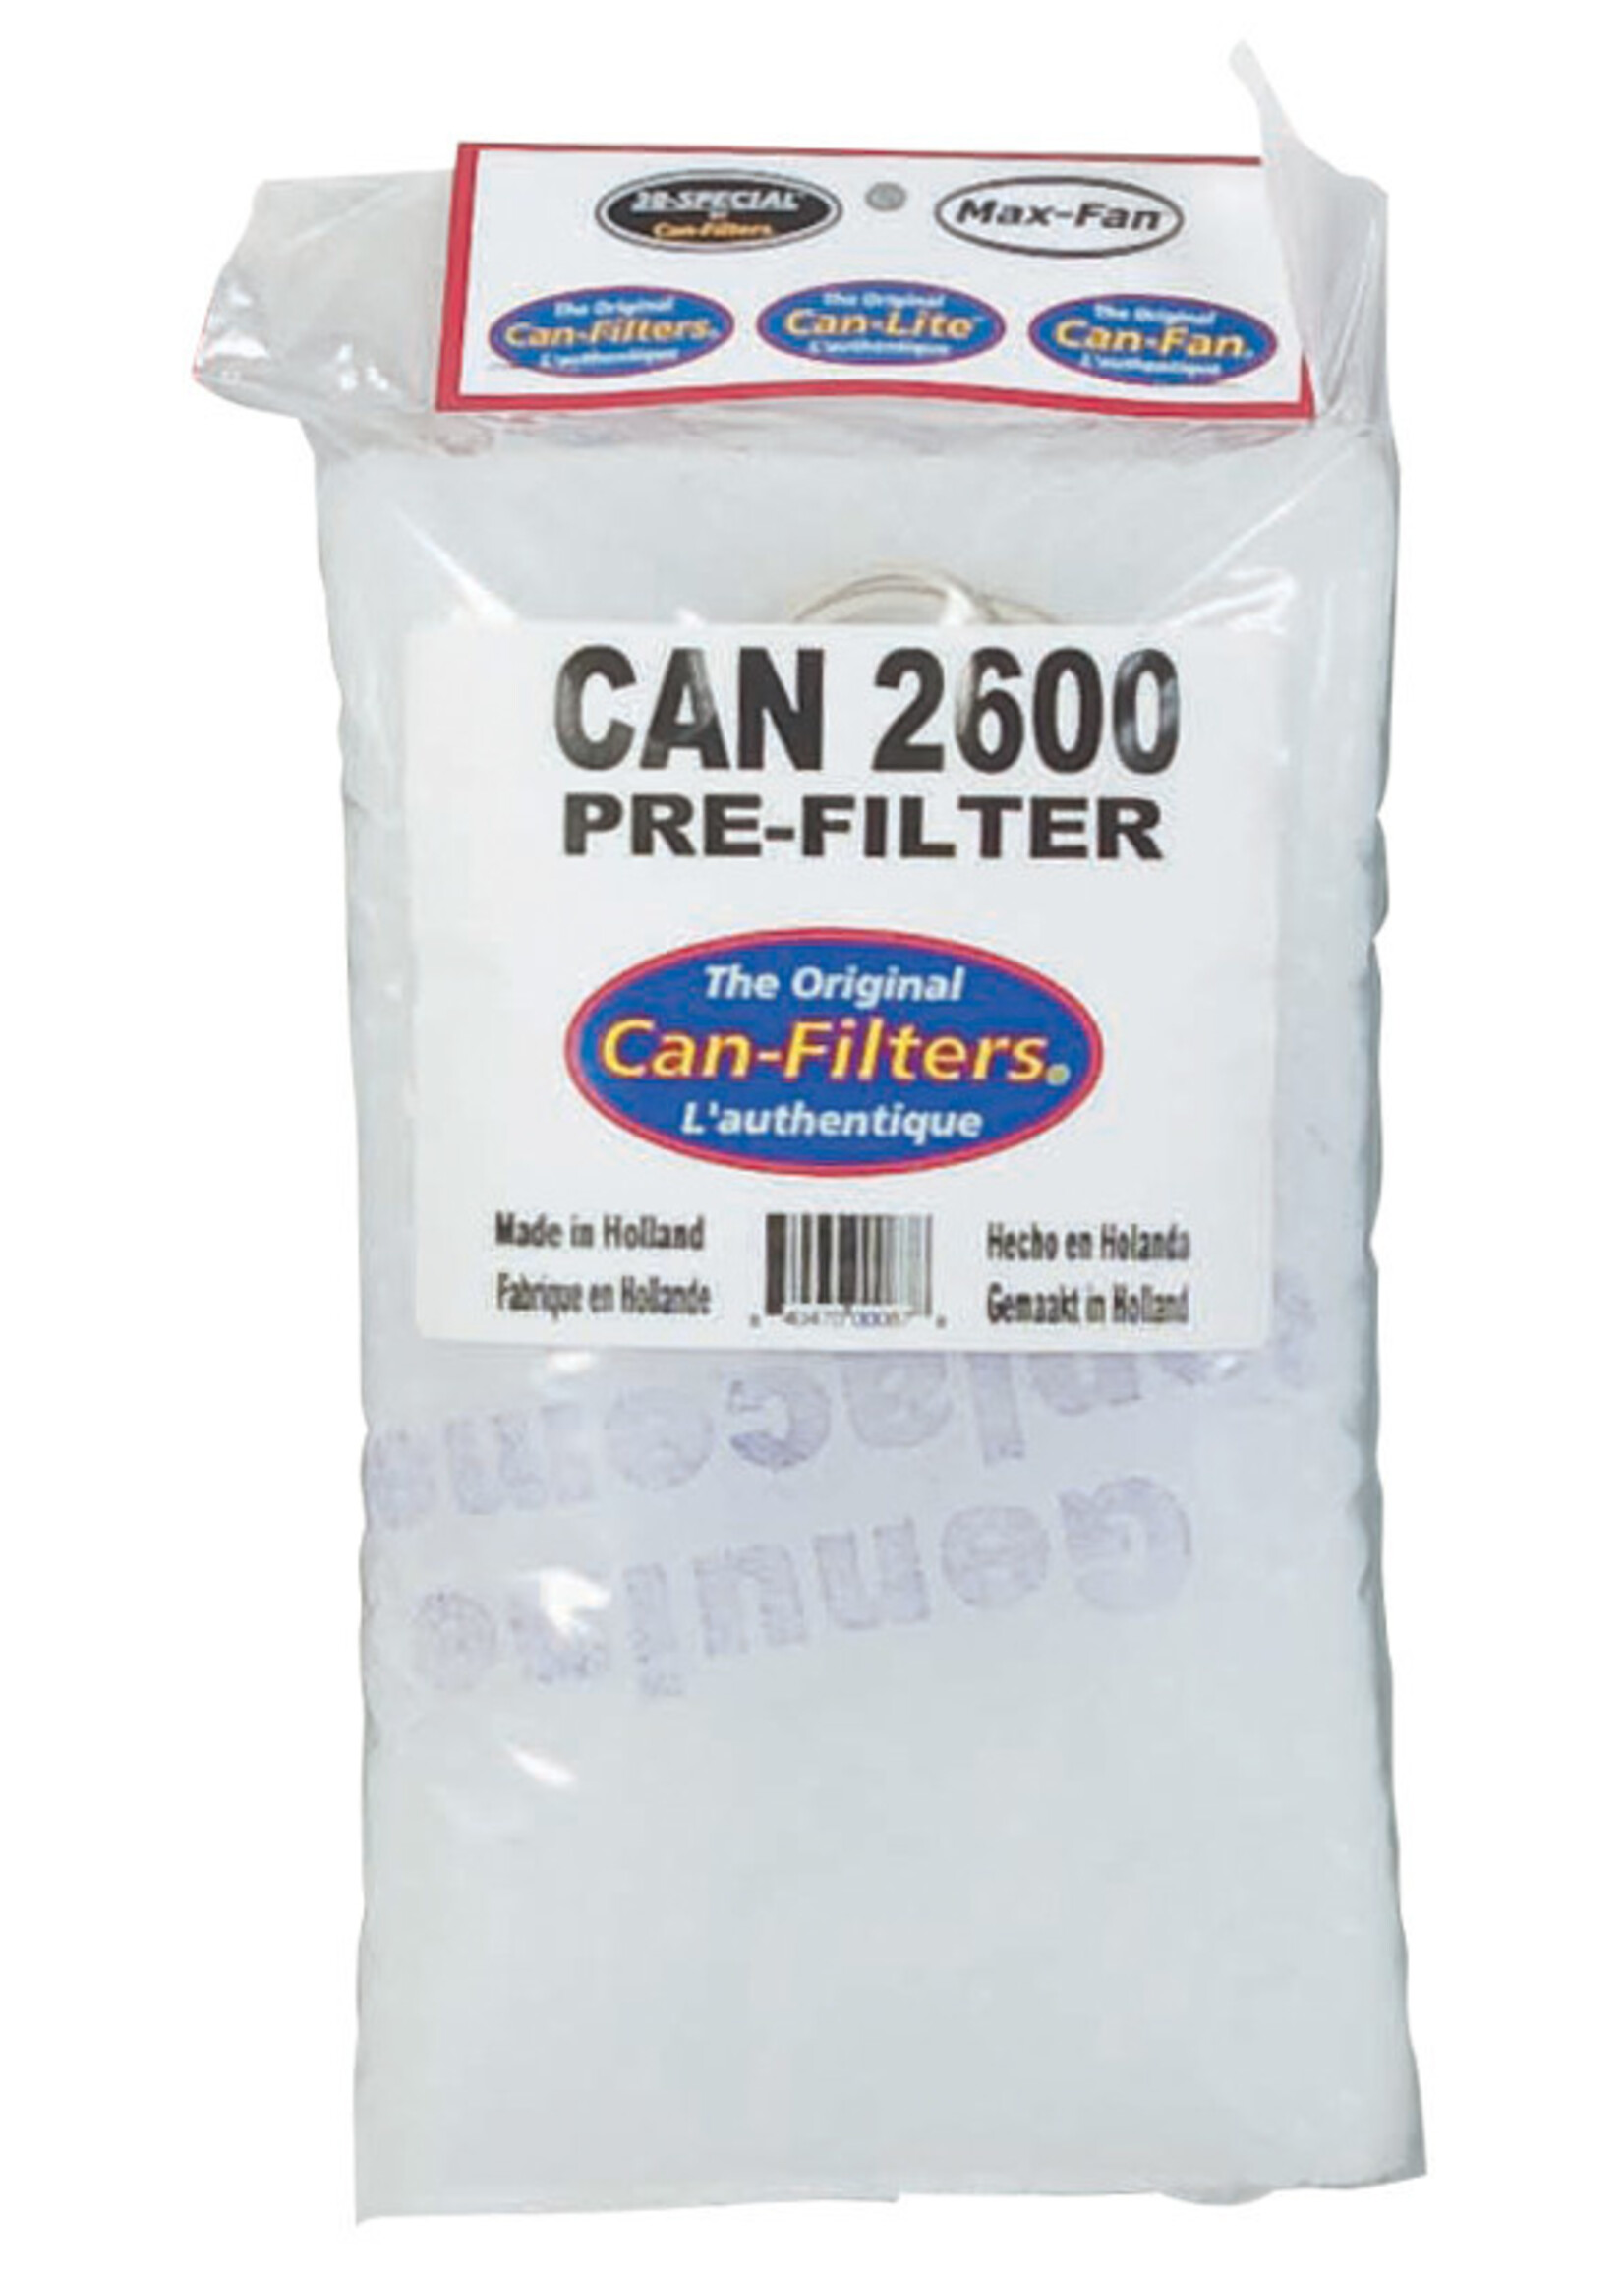 Can Fan Can Replacement Pre-Filter 2600